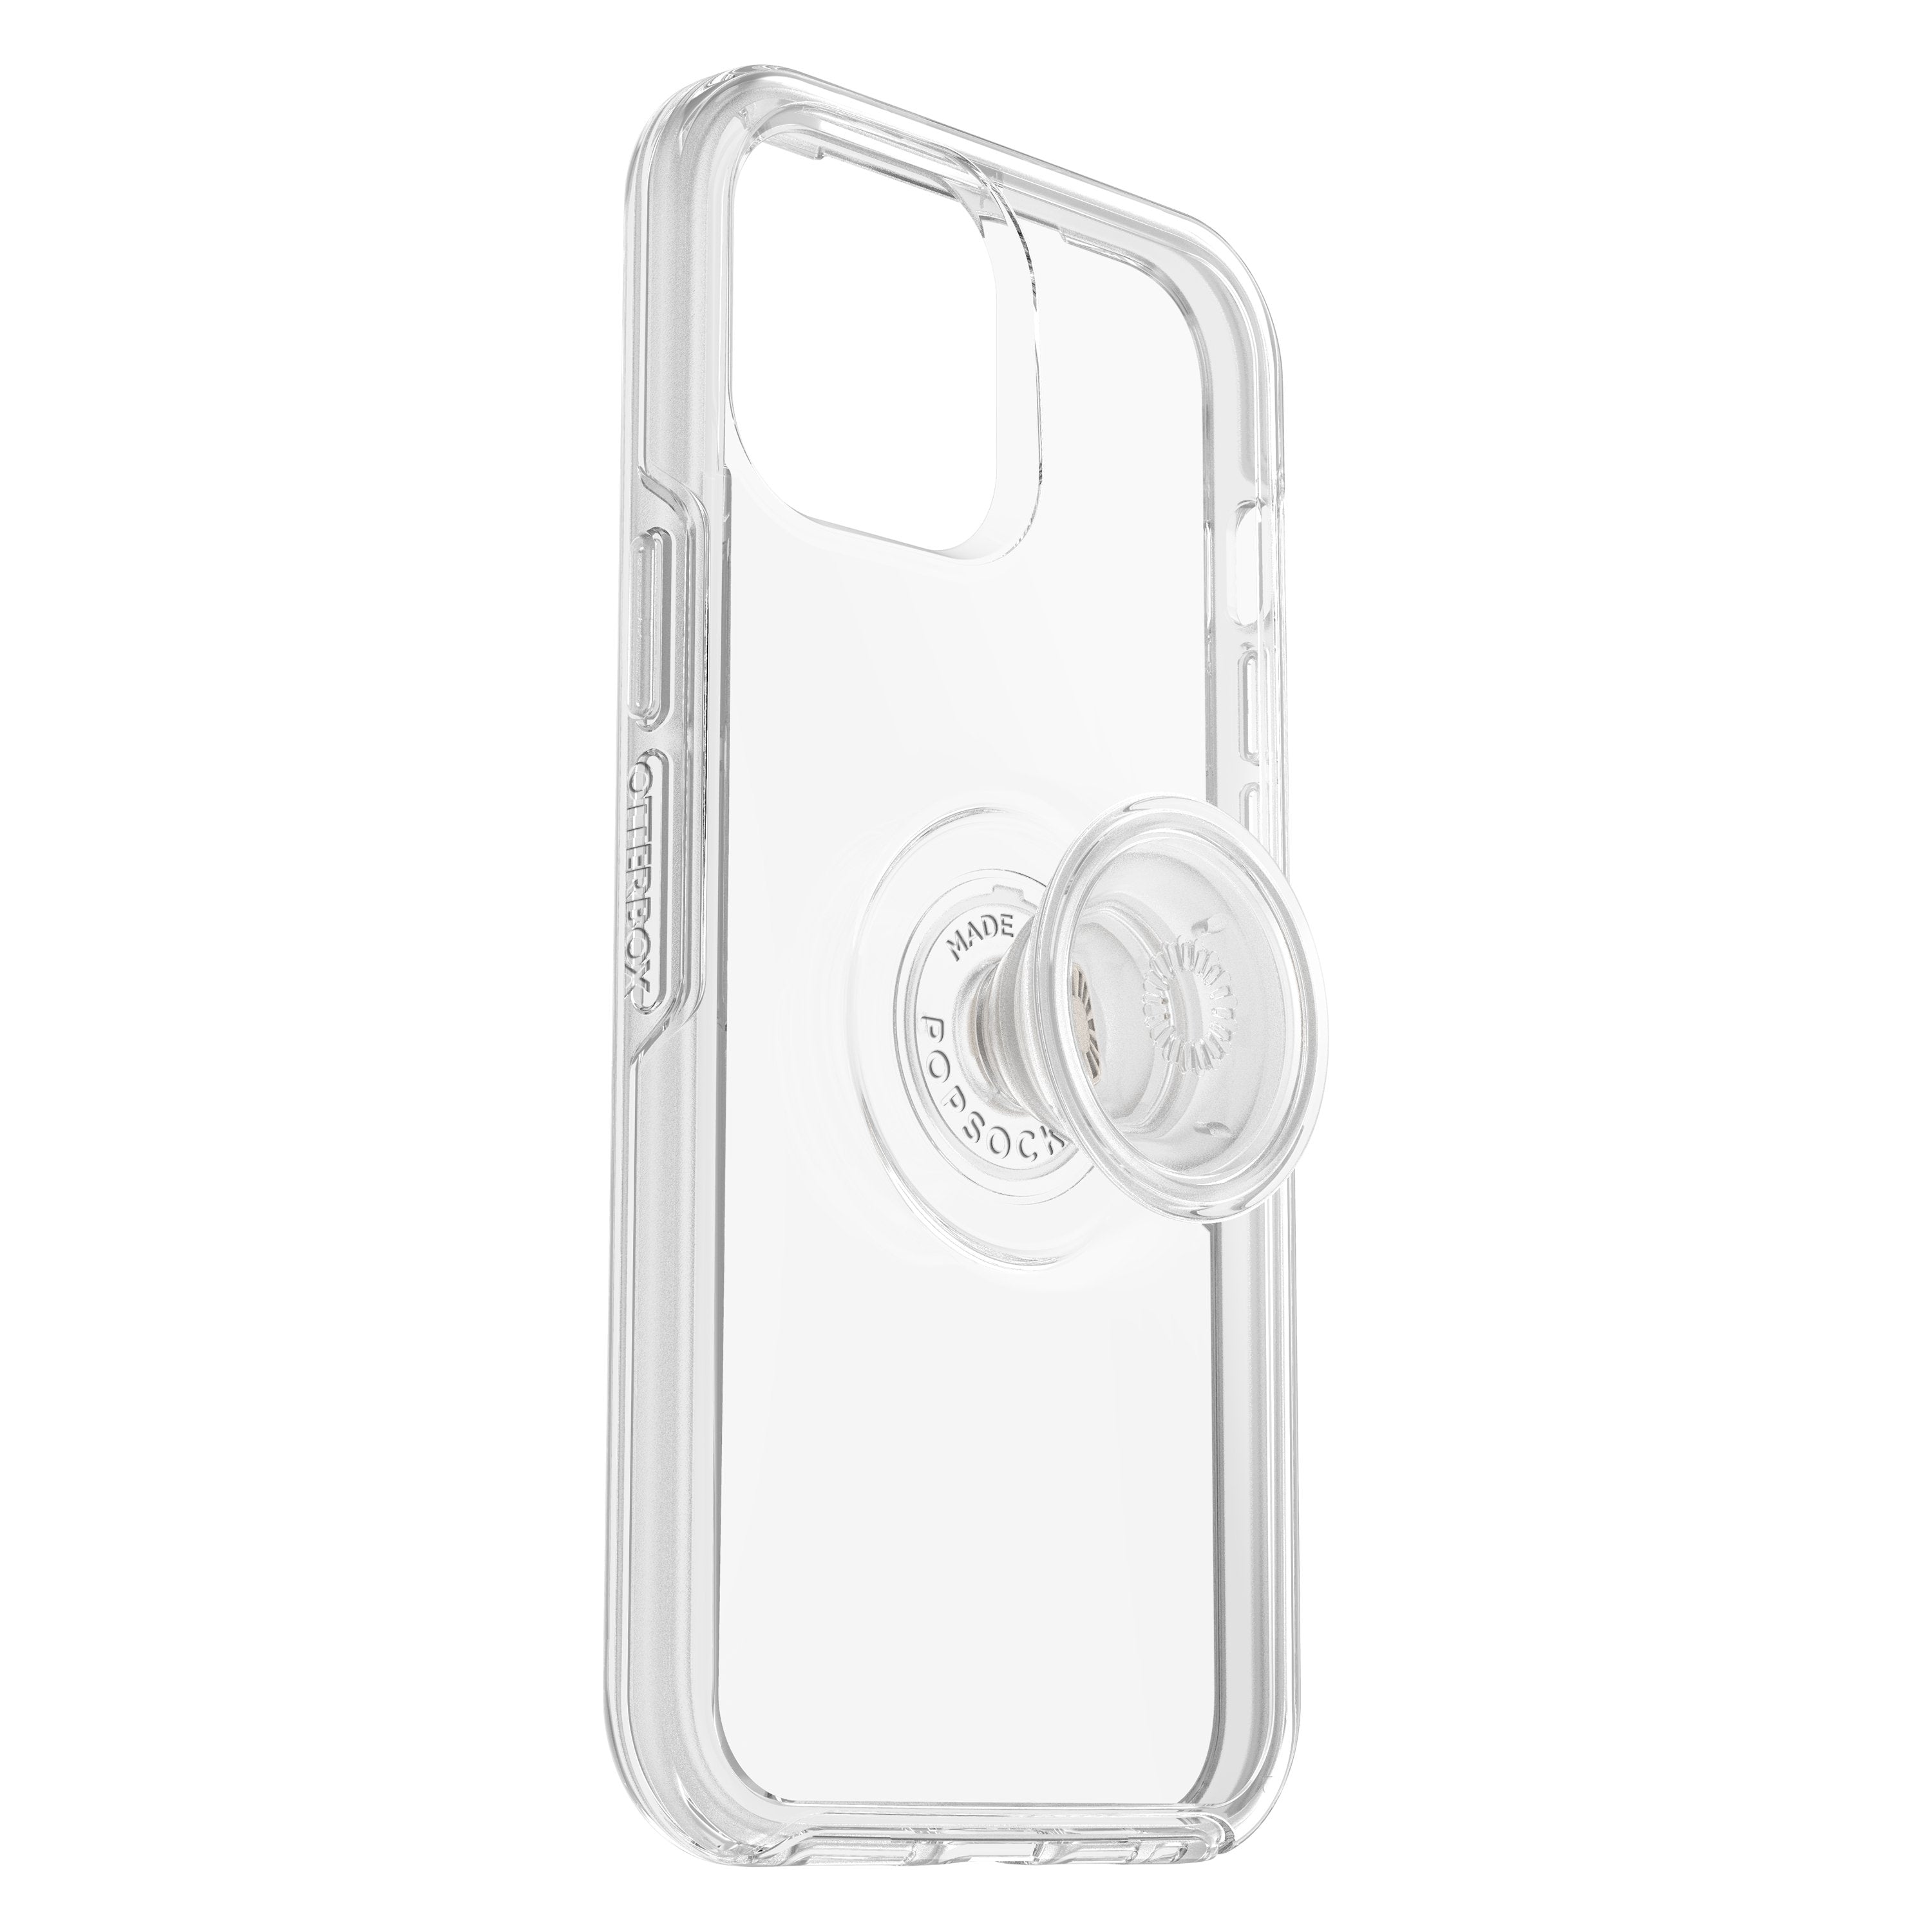 OtterBox OTTER+POP SYMMETRY Apple iPhone 12 Pro Max case - Drop Protection Cover w/ PopSocket Phone Holder, Slim Protective Selfie Case, Wireless Charging Compatible - Clear